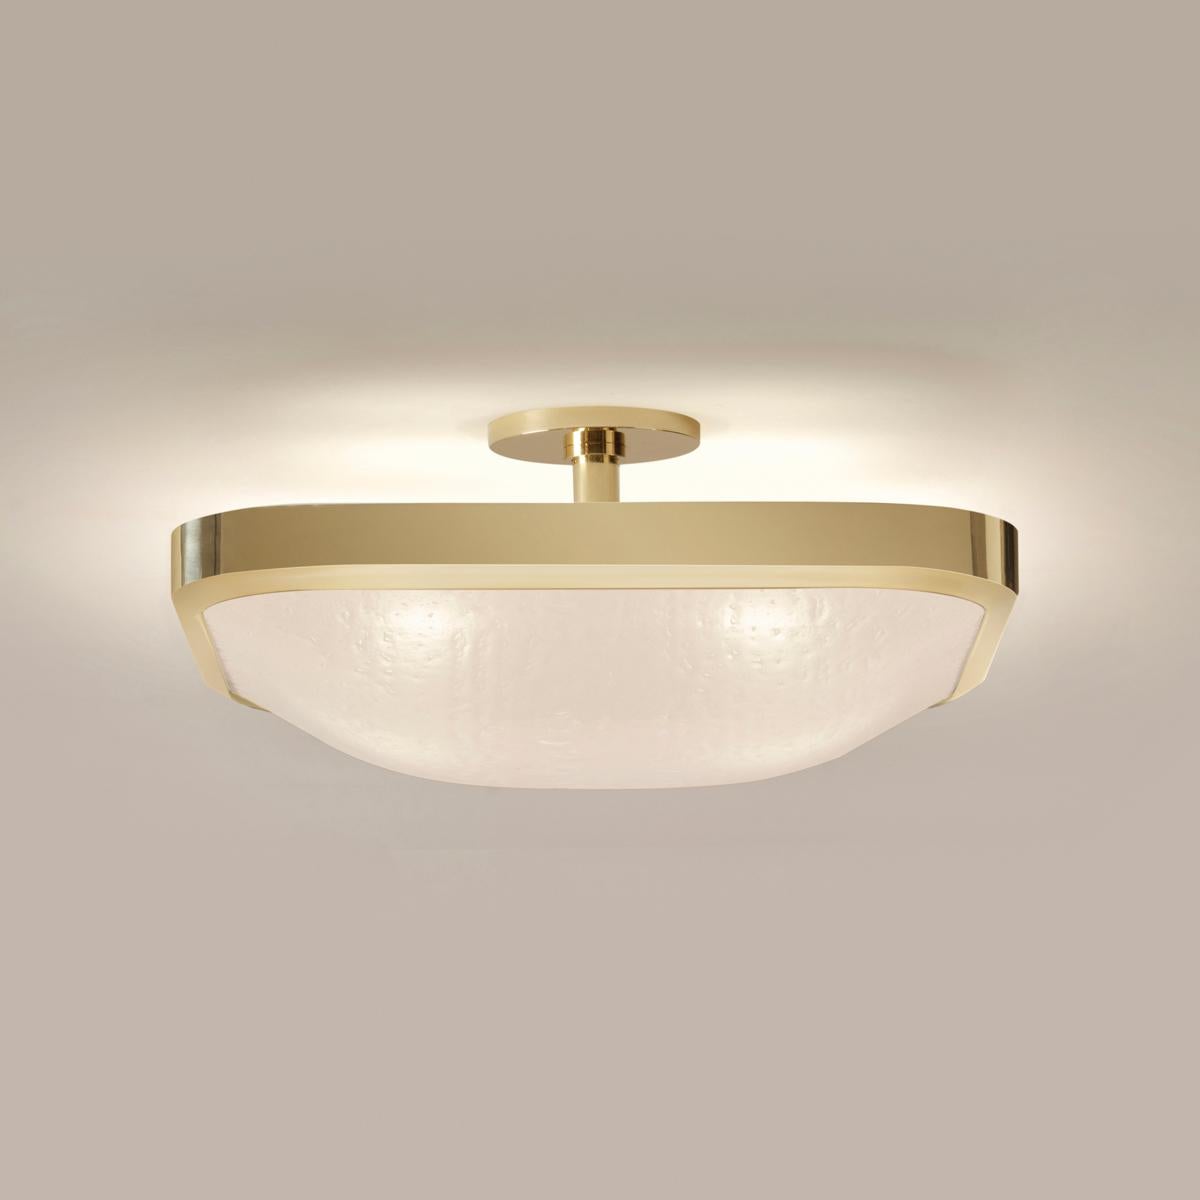 The Uno Square ceiling light exemplifies simple elegance via its clean profile designed around a single Murano glass shade.

Shown in the primary images in polished brass-subsequent pictures show the fixture in other featured finishes.

Starting at